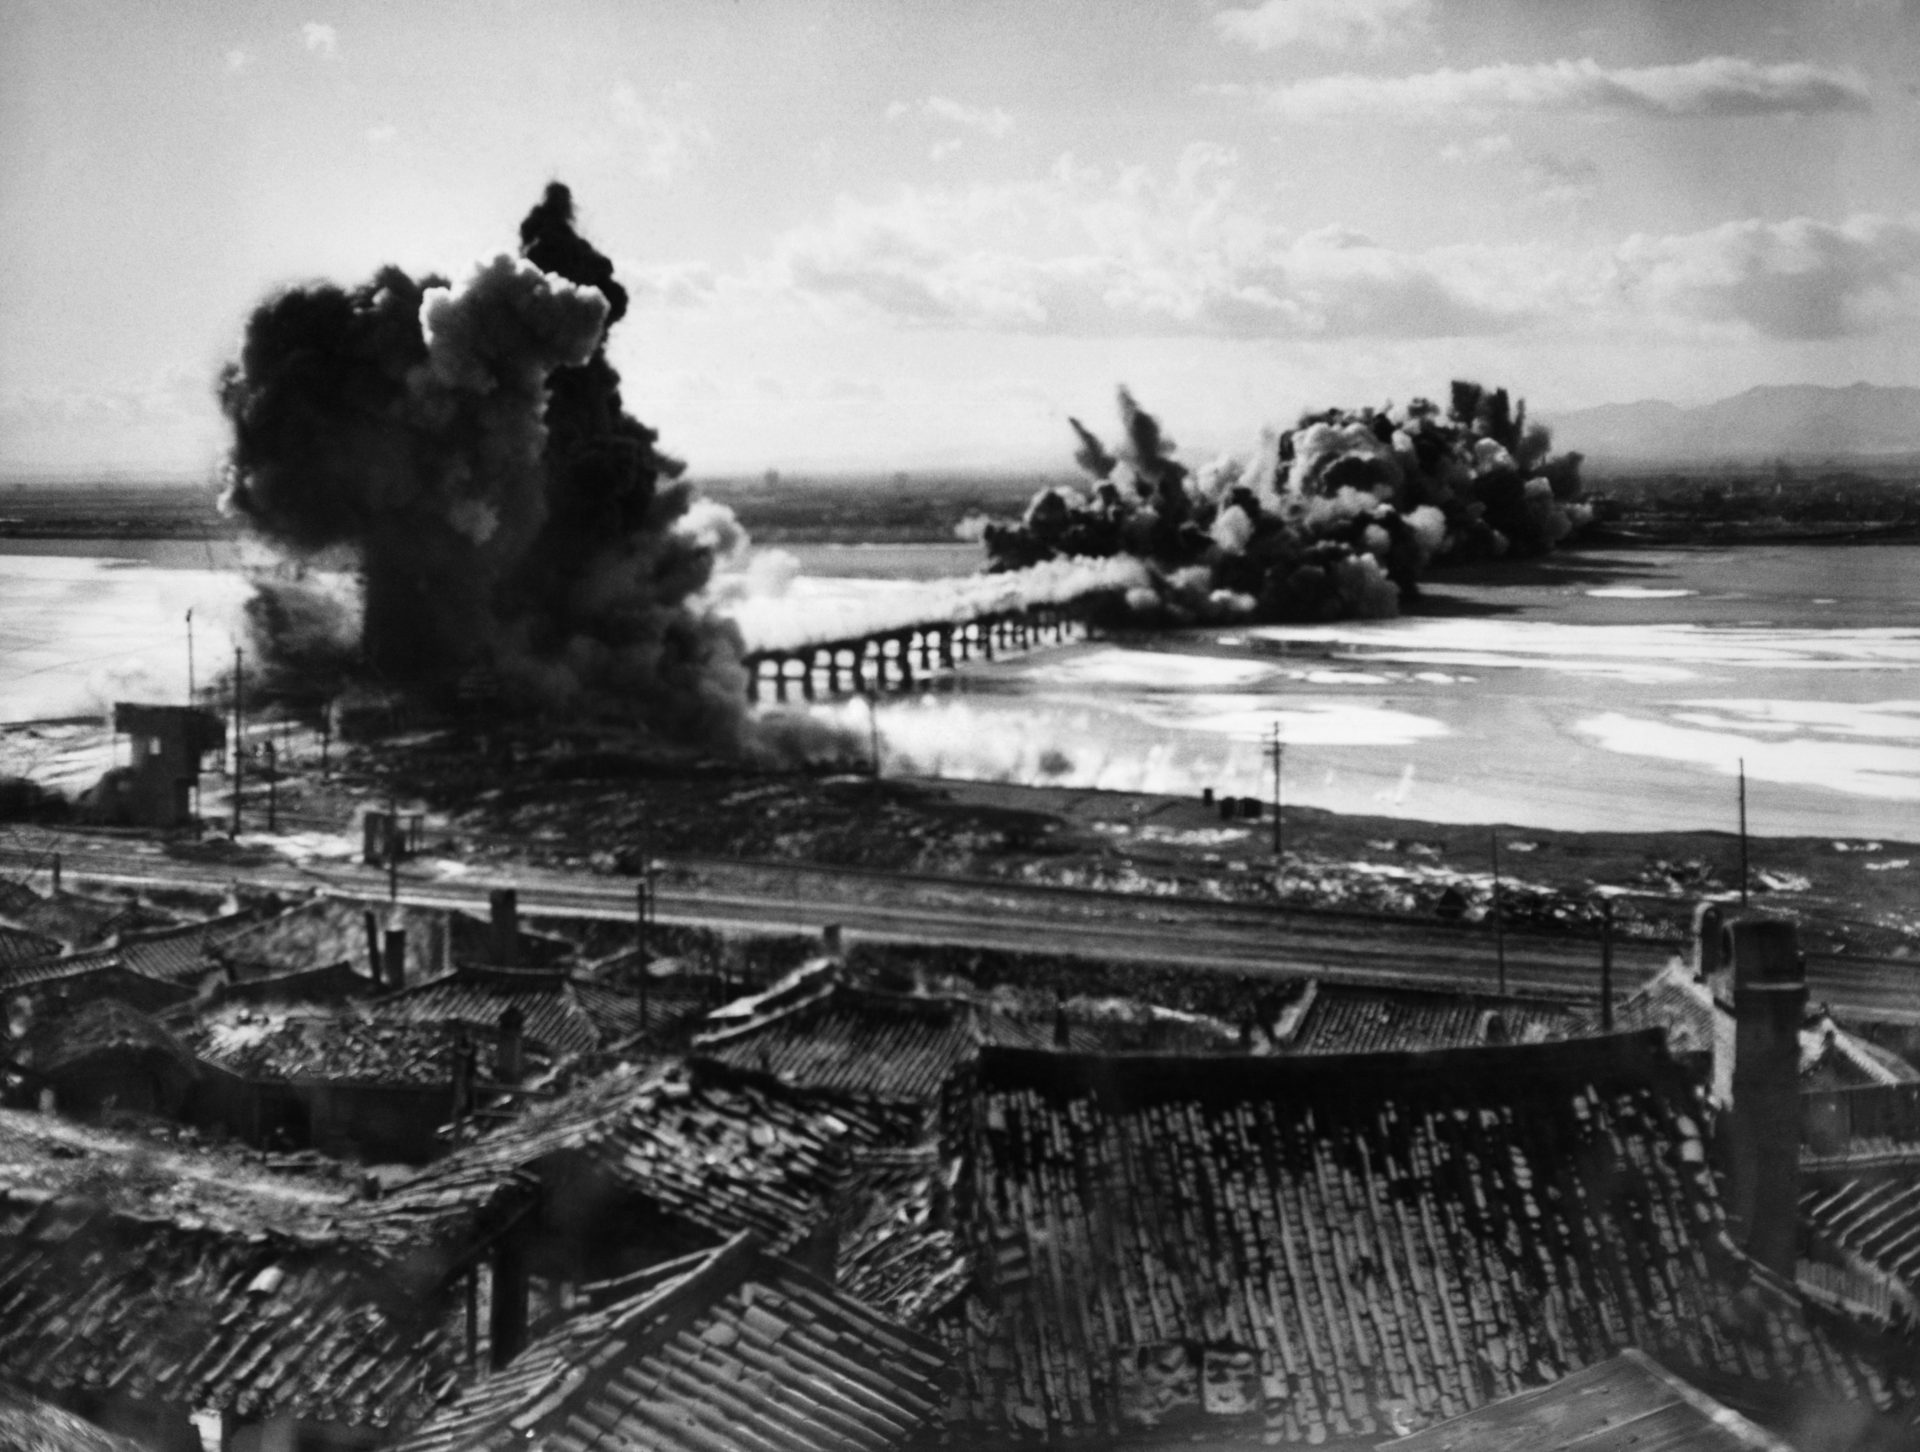 The Songchon River bridge into Hamhung is destroyed by demolition teams to slow the advance of Communist troops as United Nations troops evacuated the North Korean industrial city after the retreat from Chosin Reservoir.